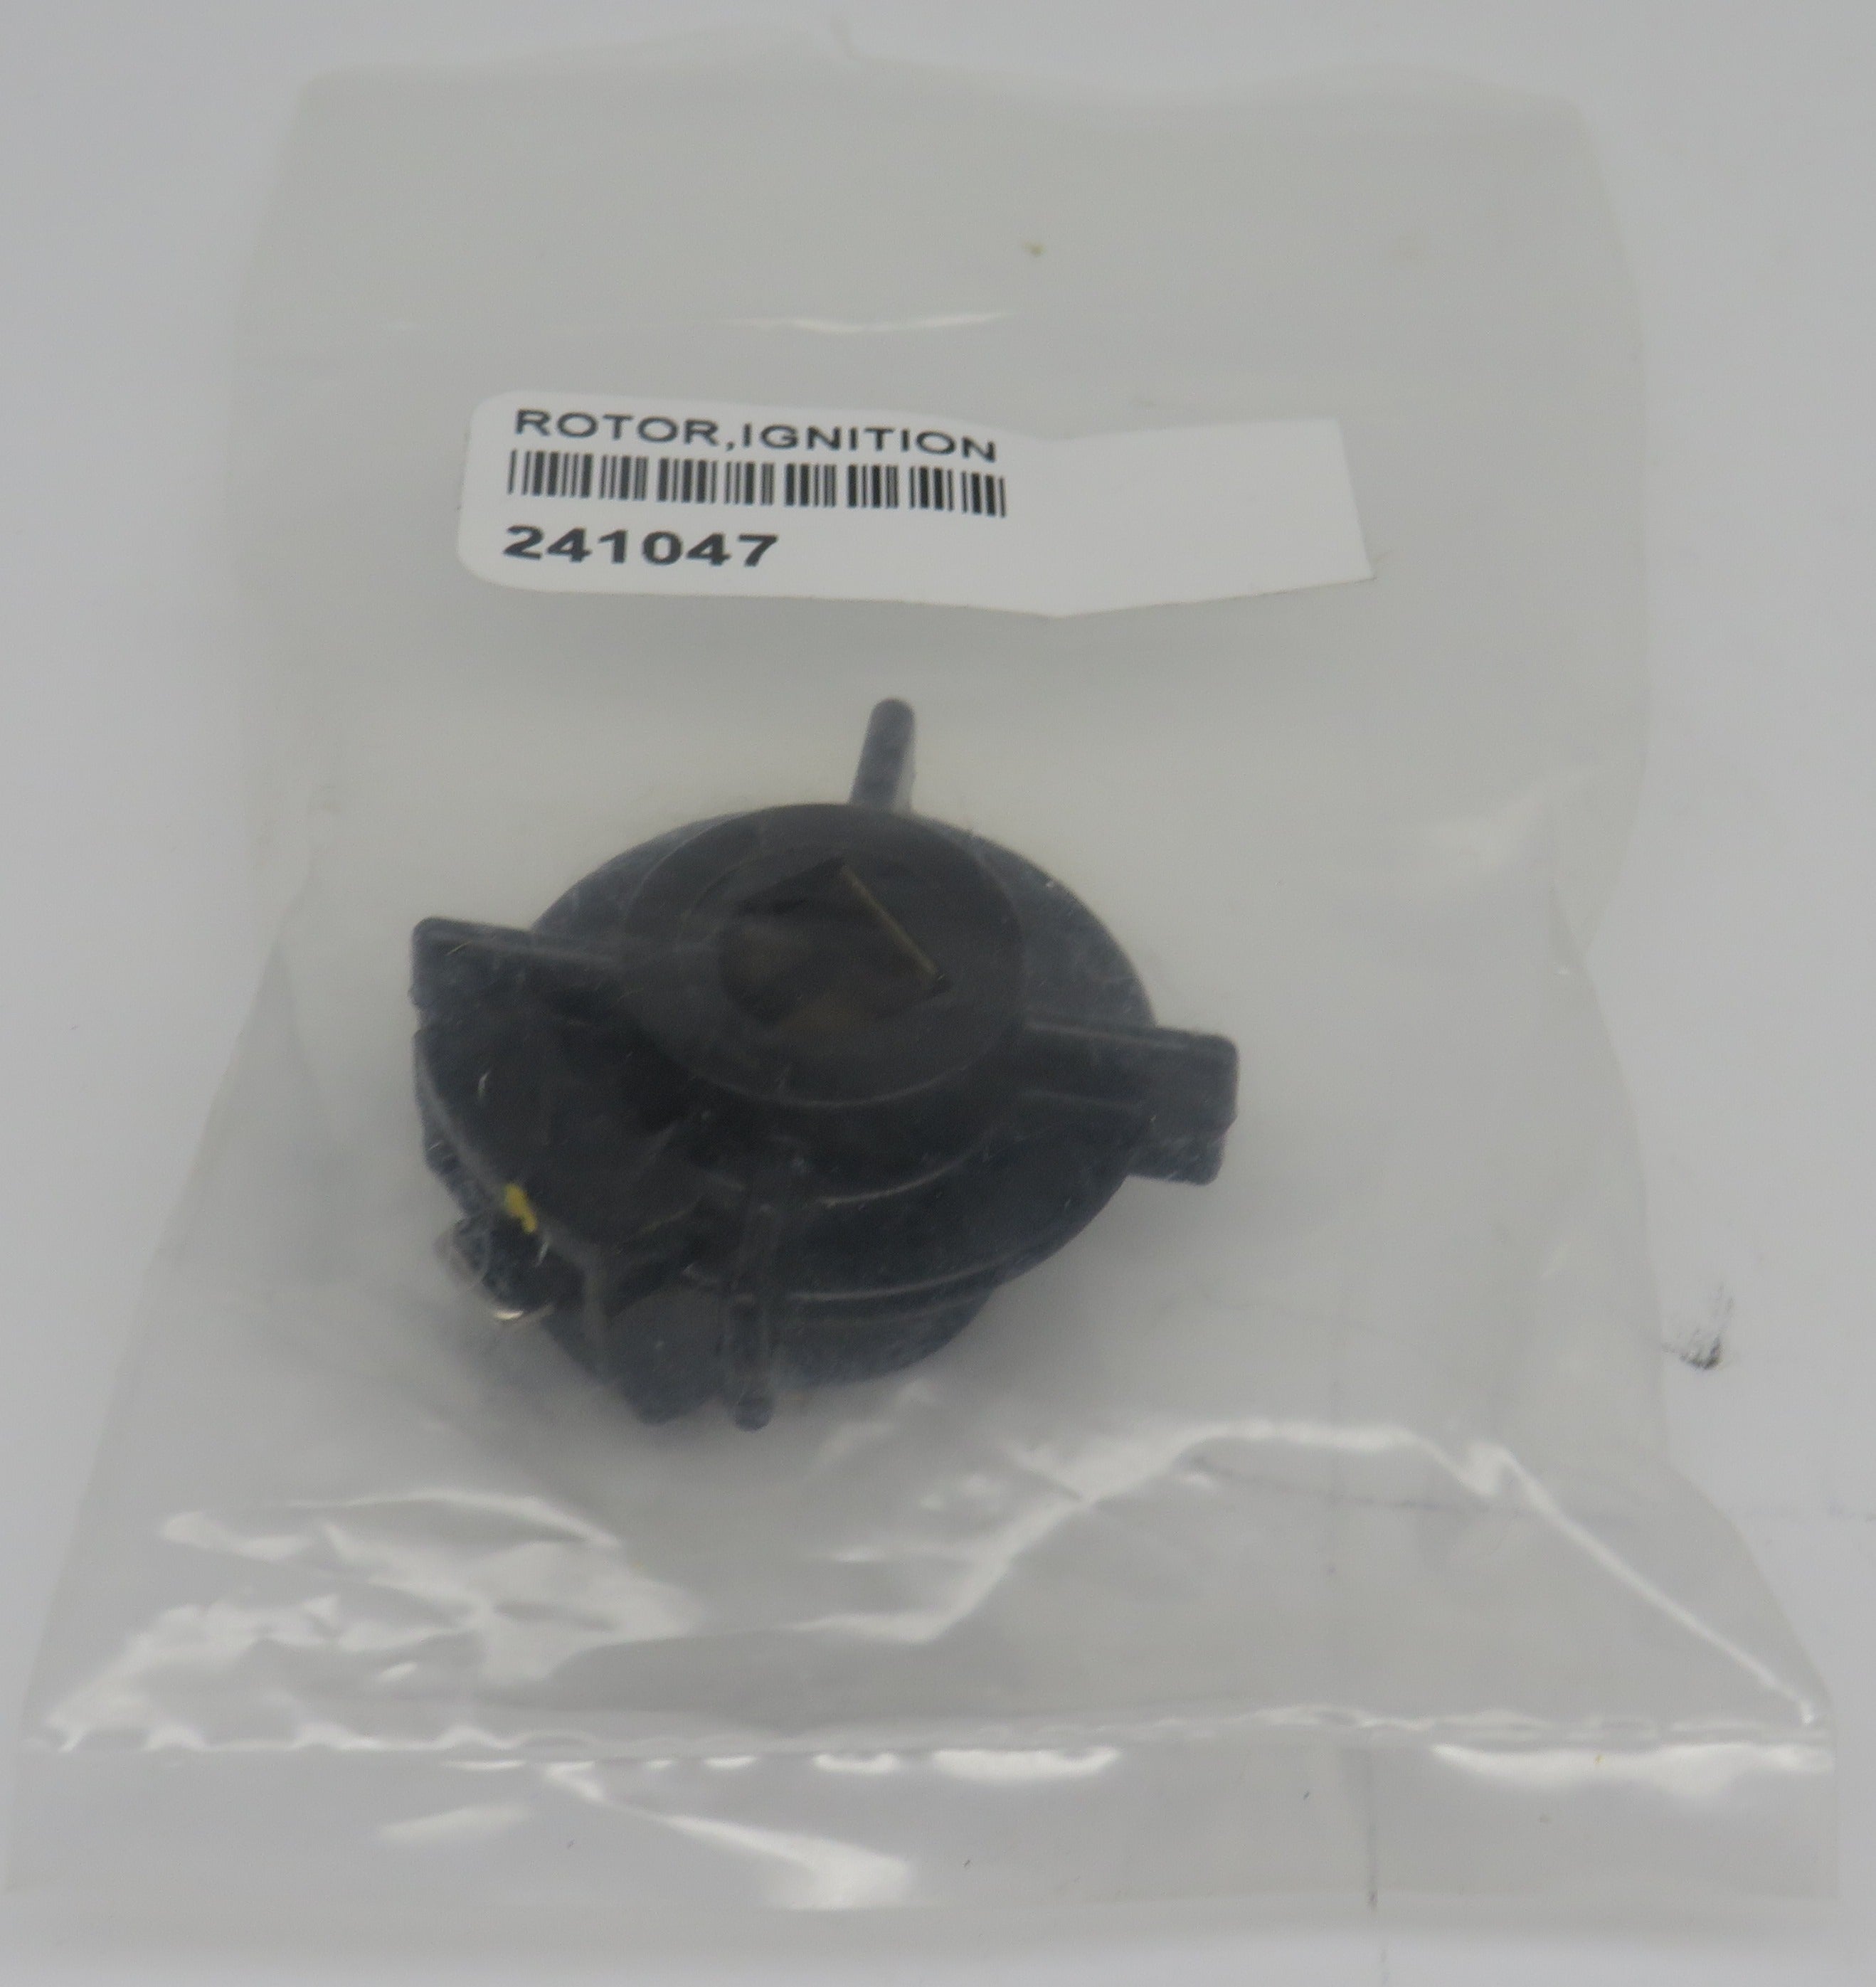 241047 Kohler Rotor Ignition (Replaced by DX2765)